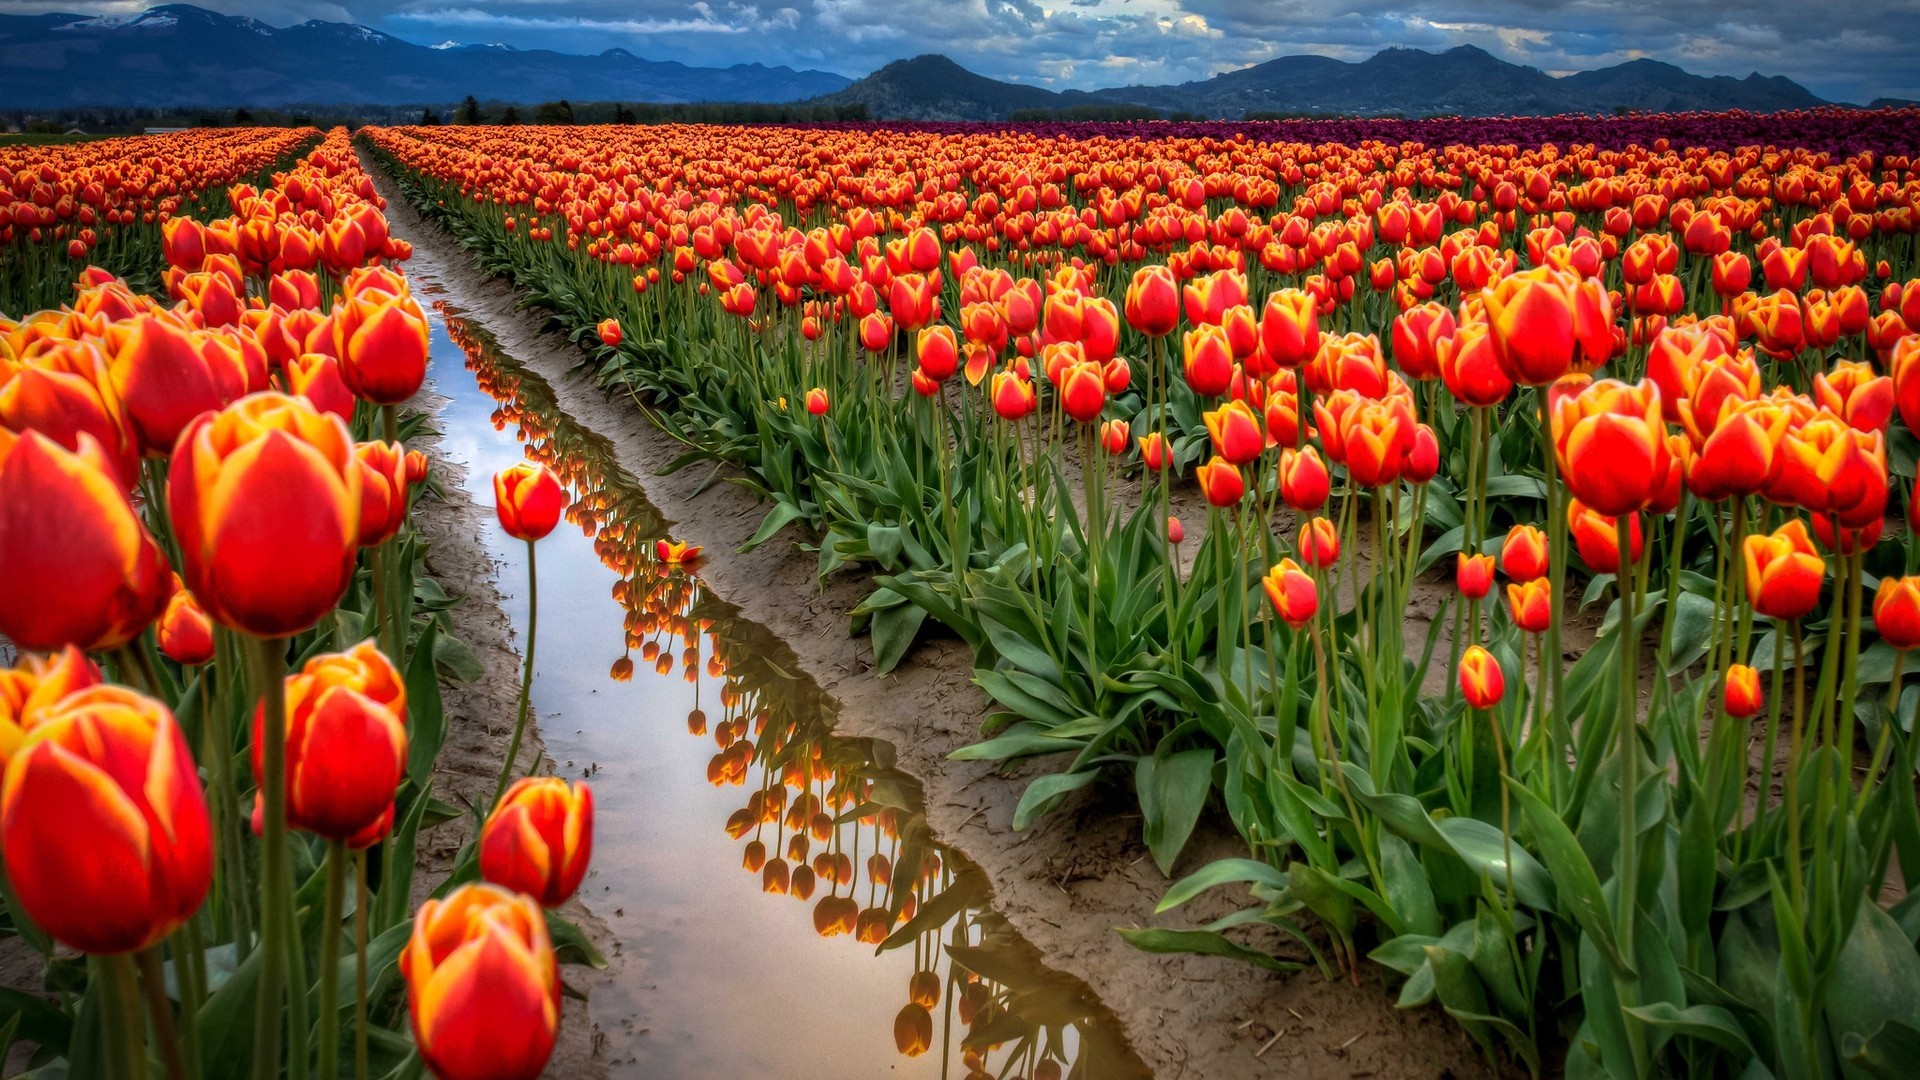 General 1920x1080 field flowers tulips reflection puddle mountains plants Agro (Plants)